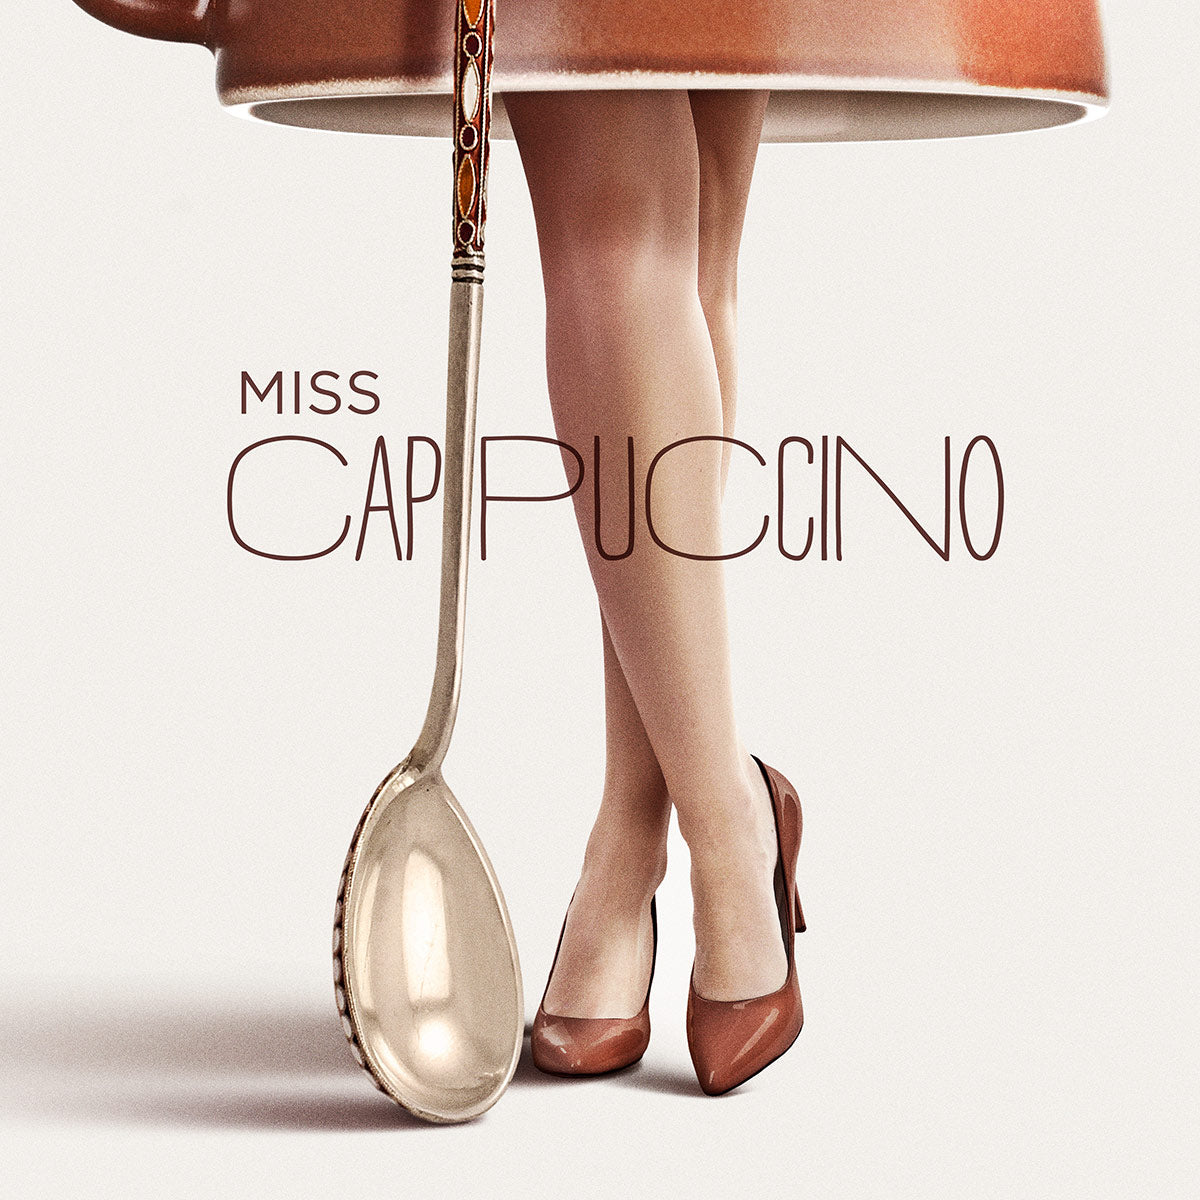 Miss Cappuccino